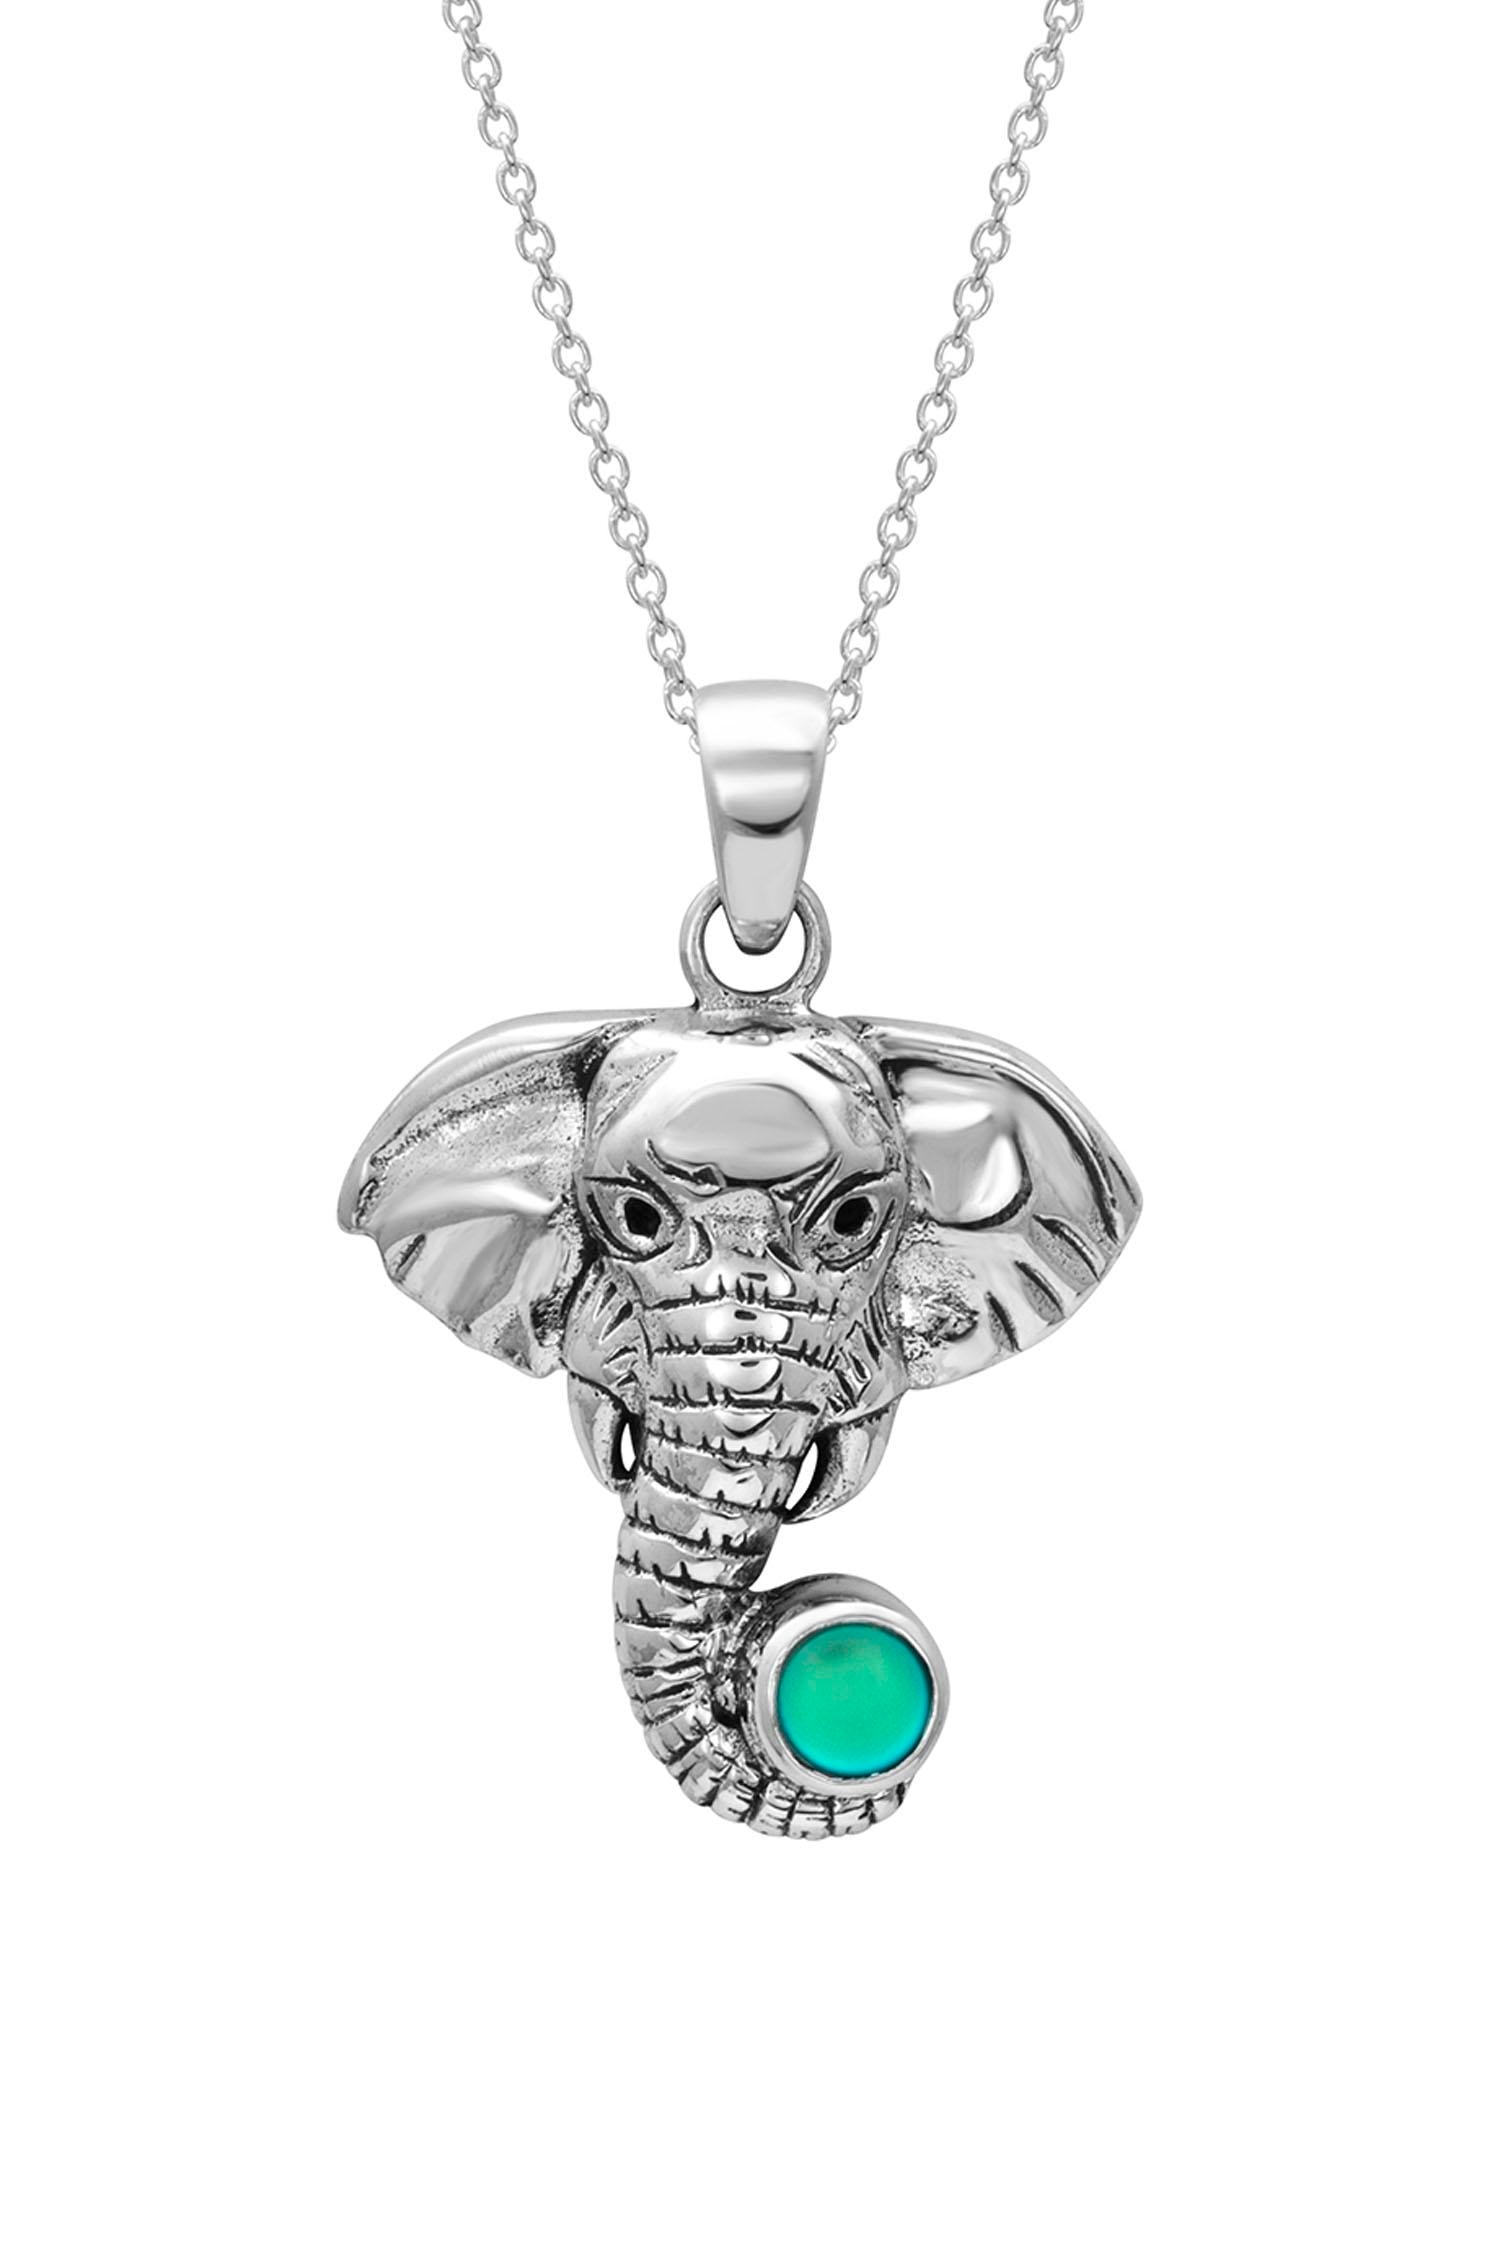 Buy 925 Sterling Silver Elephant Necklace Diamond Elephant Charm Elephant  Pendant Mother Elephant and Baby Elephant Necklace birthday Gift Online in  India - Etsy